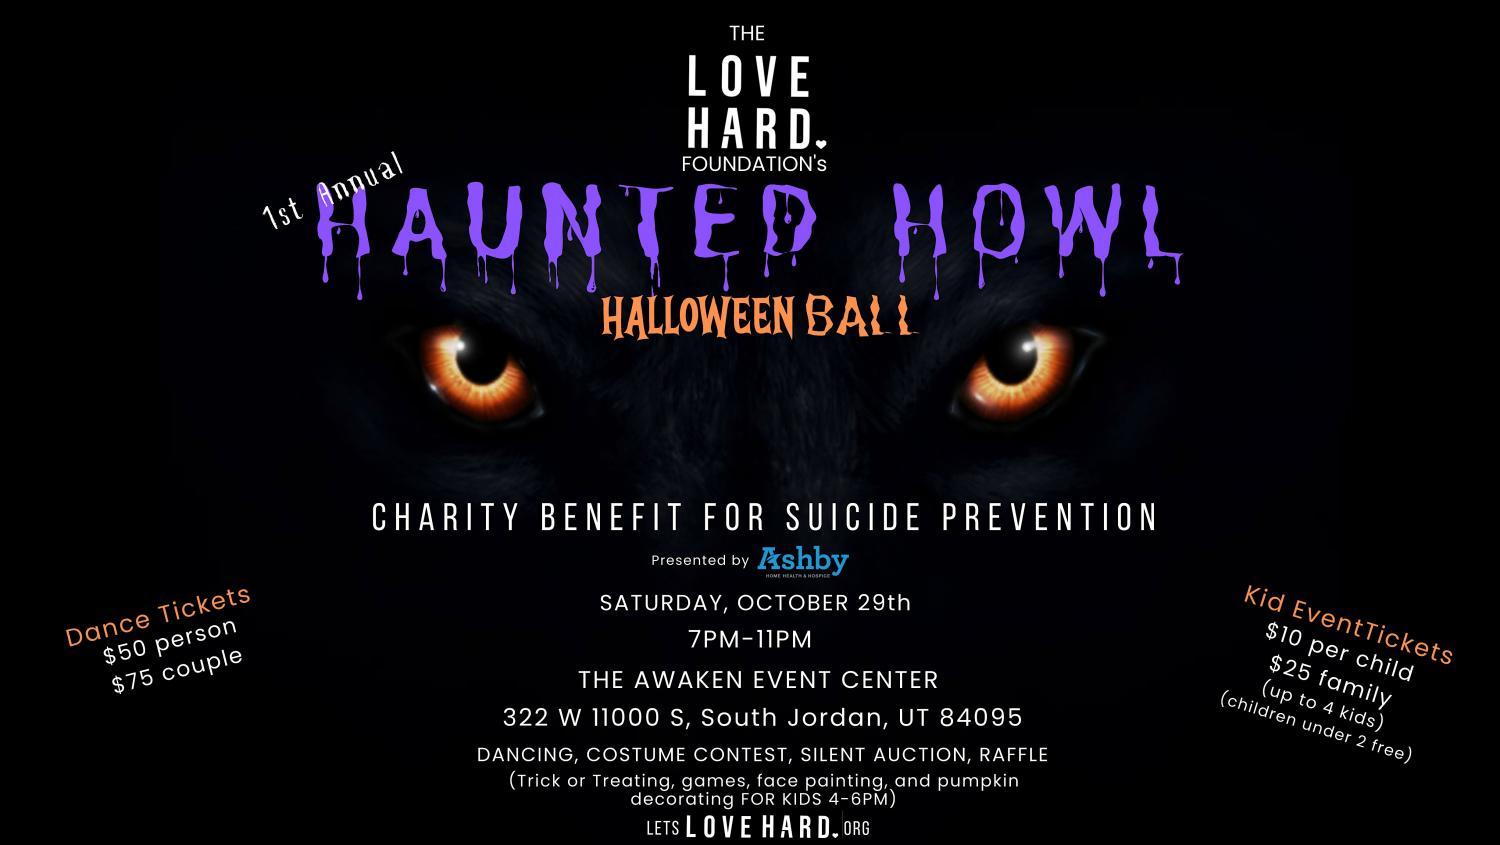 Annual Haunted Howl halloween ball
Sat Oct 29, 7:00 PM - Sat Oct 29, 11:00 PM
in 9 days